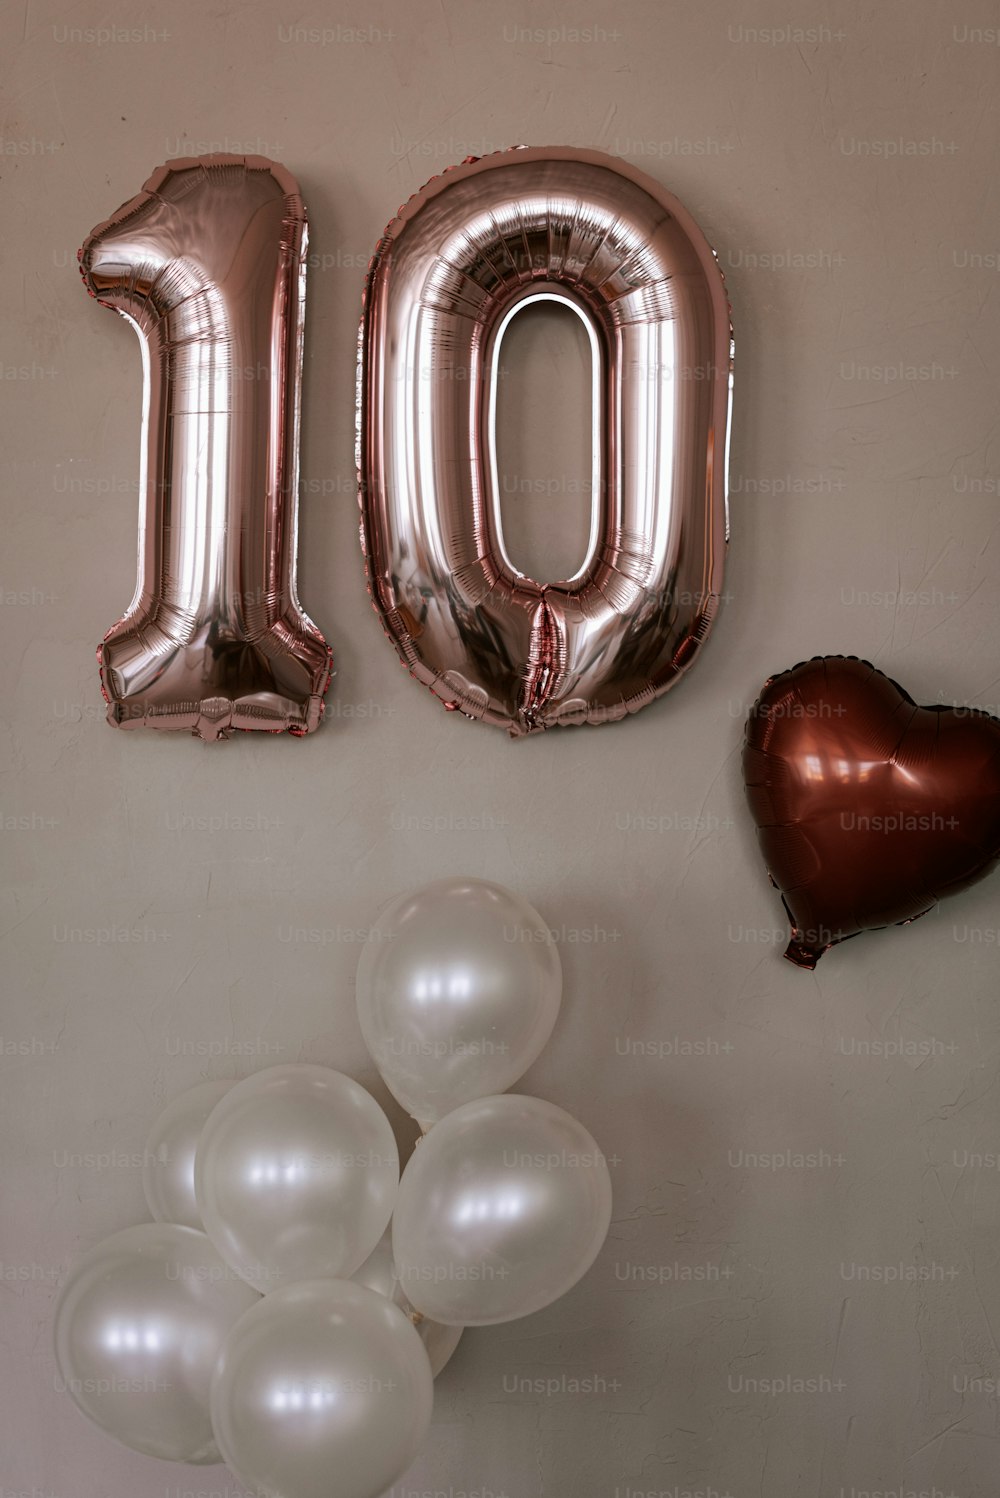 a number 10 balloon and a bunch of balloons